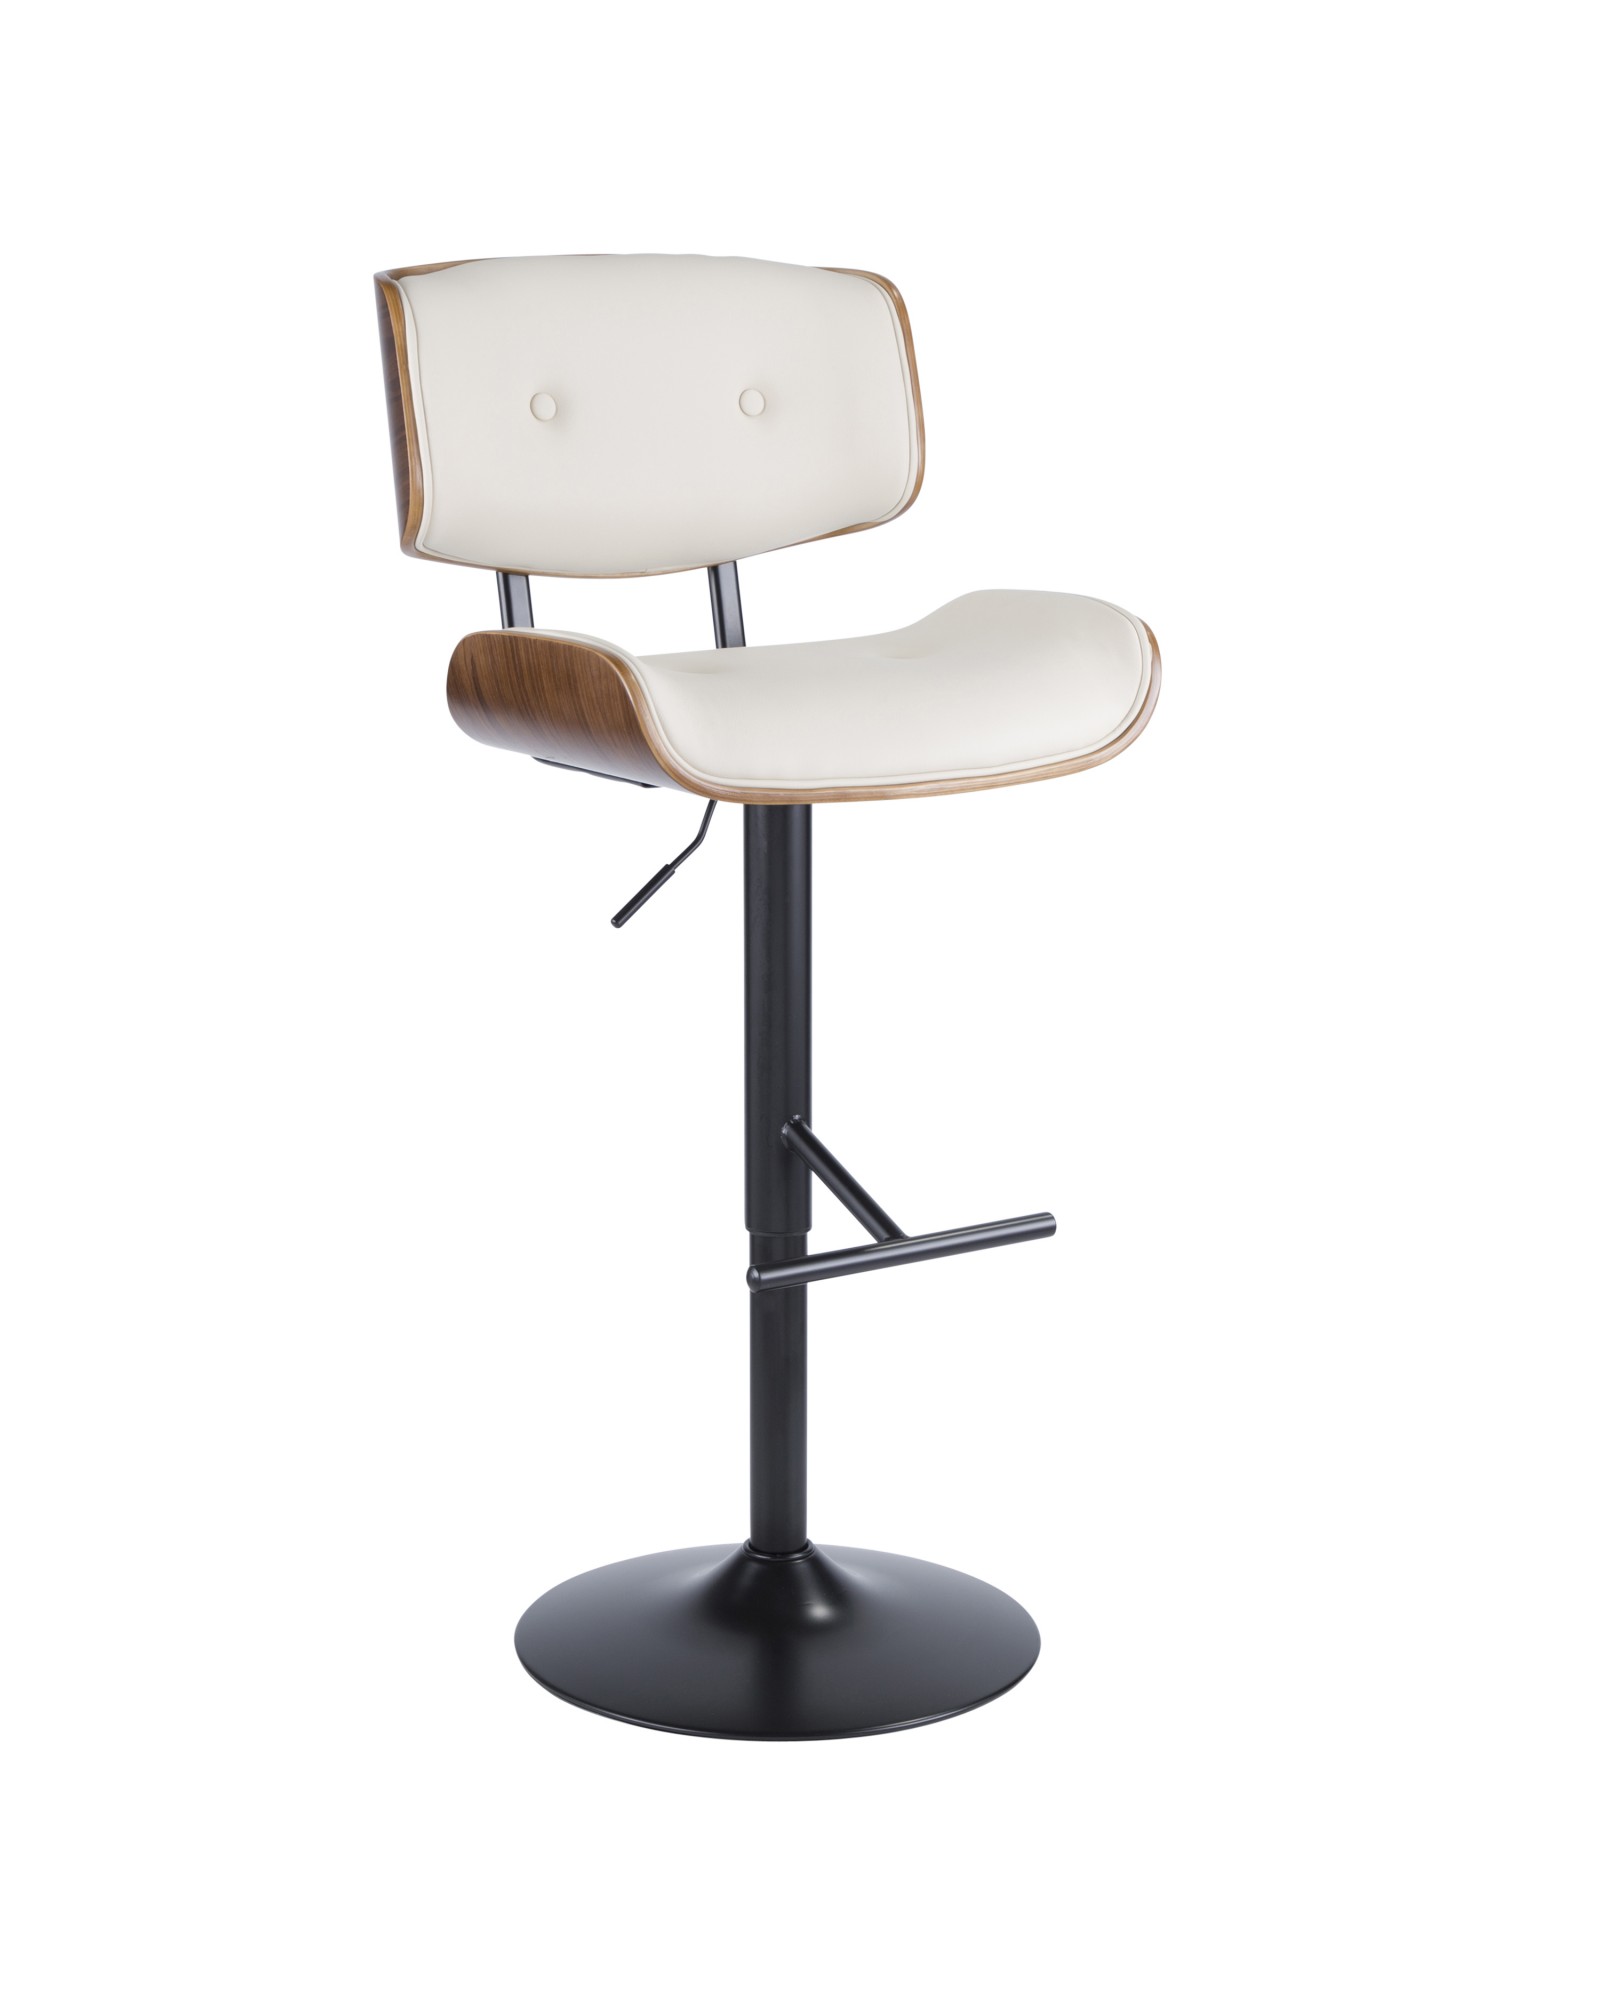 Lombardi Mid-Century Modern Adjustable Barstool in Walnut with Cream Faux Leather